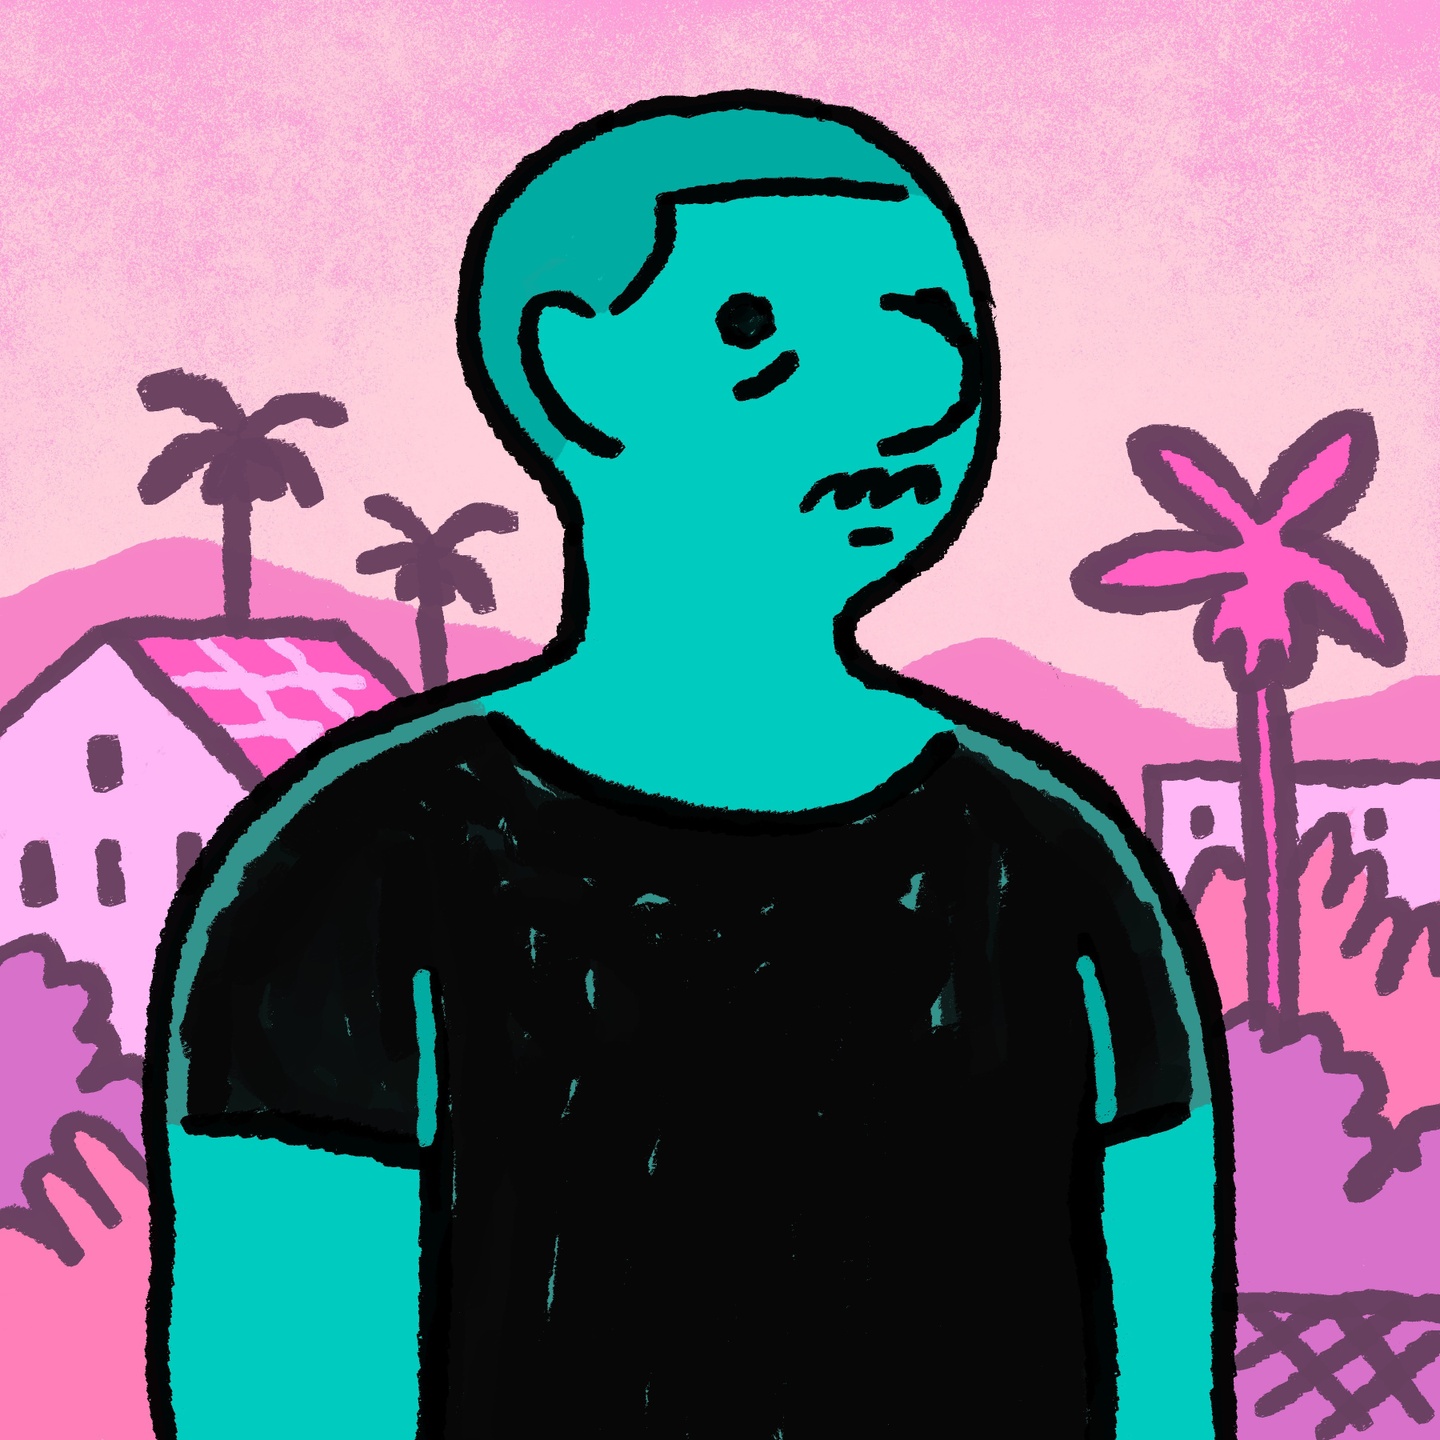 Illustrated portrait of a person with teal skin tones in a black shirt, with a pinkish-purple background of trees, houses, and sky.